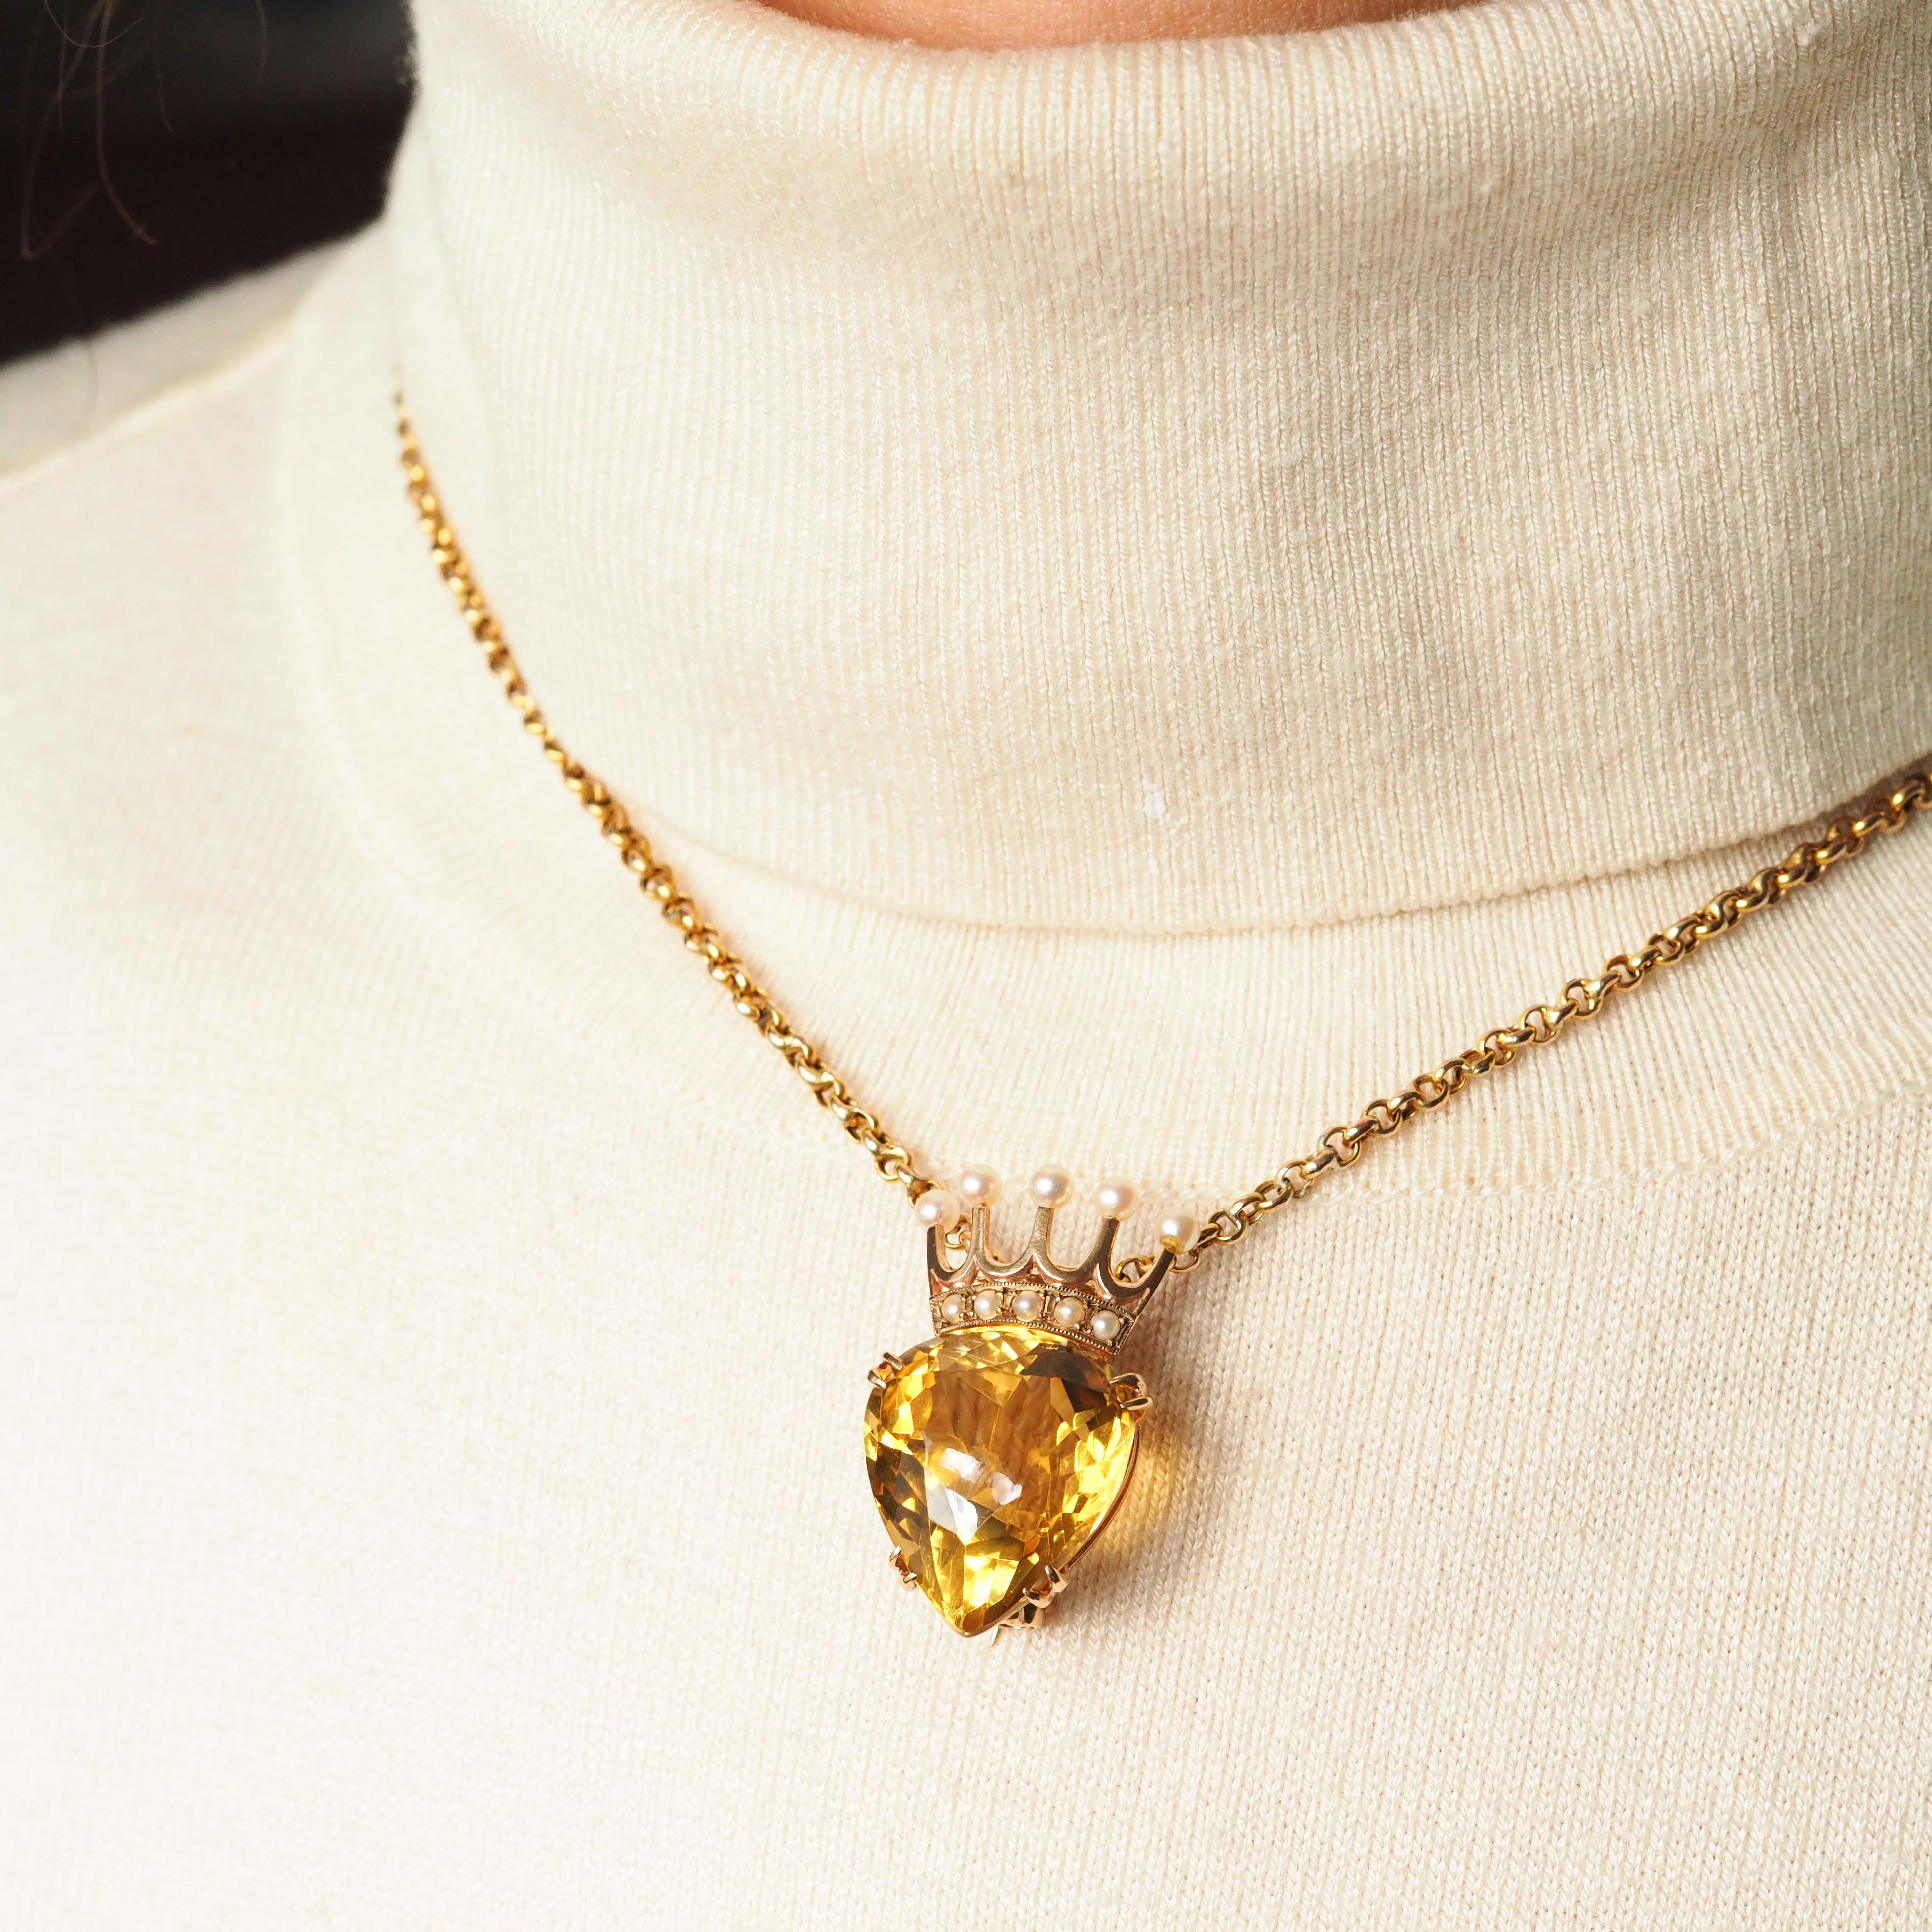 Pear Cut A Citrine & Pearl Pendant Necklace/Brooch 14K Gold Heart Coronet Crown 